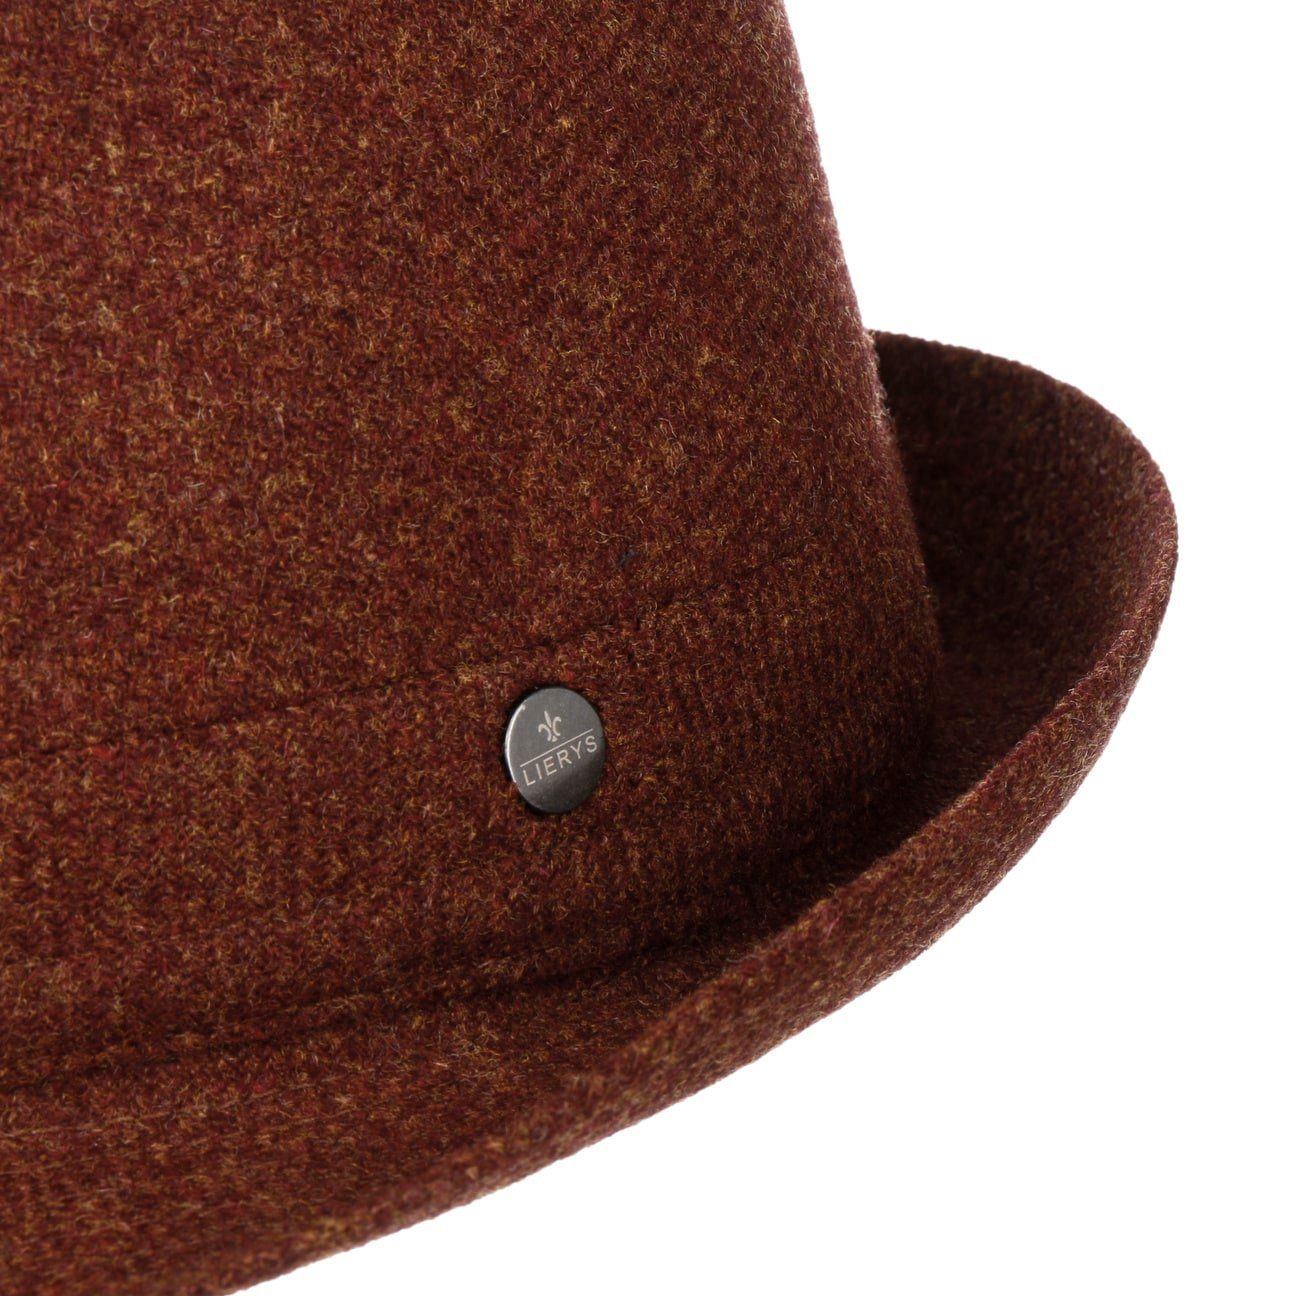 Italy in (1-St) Lierys Futter, mit Trilby rost Wolltrilby Made